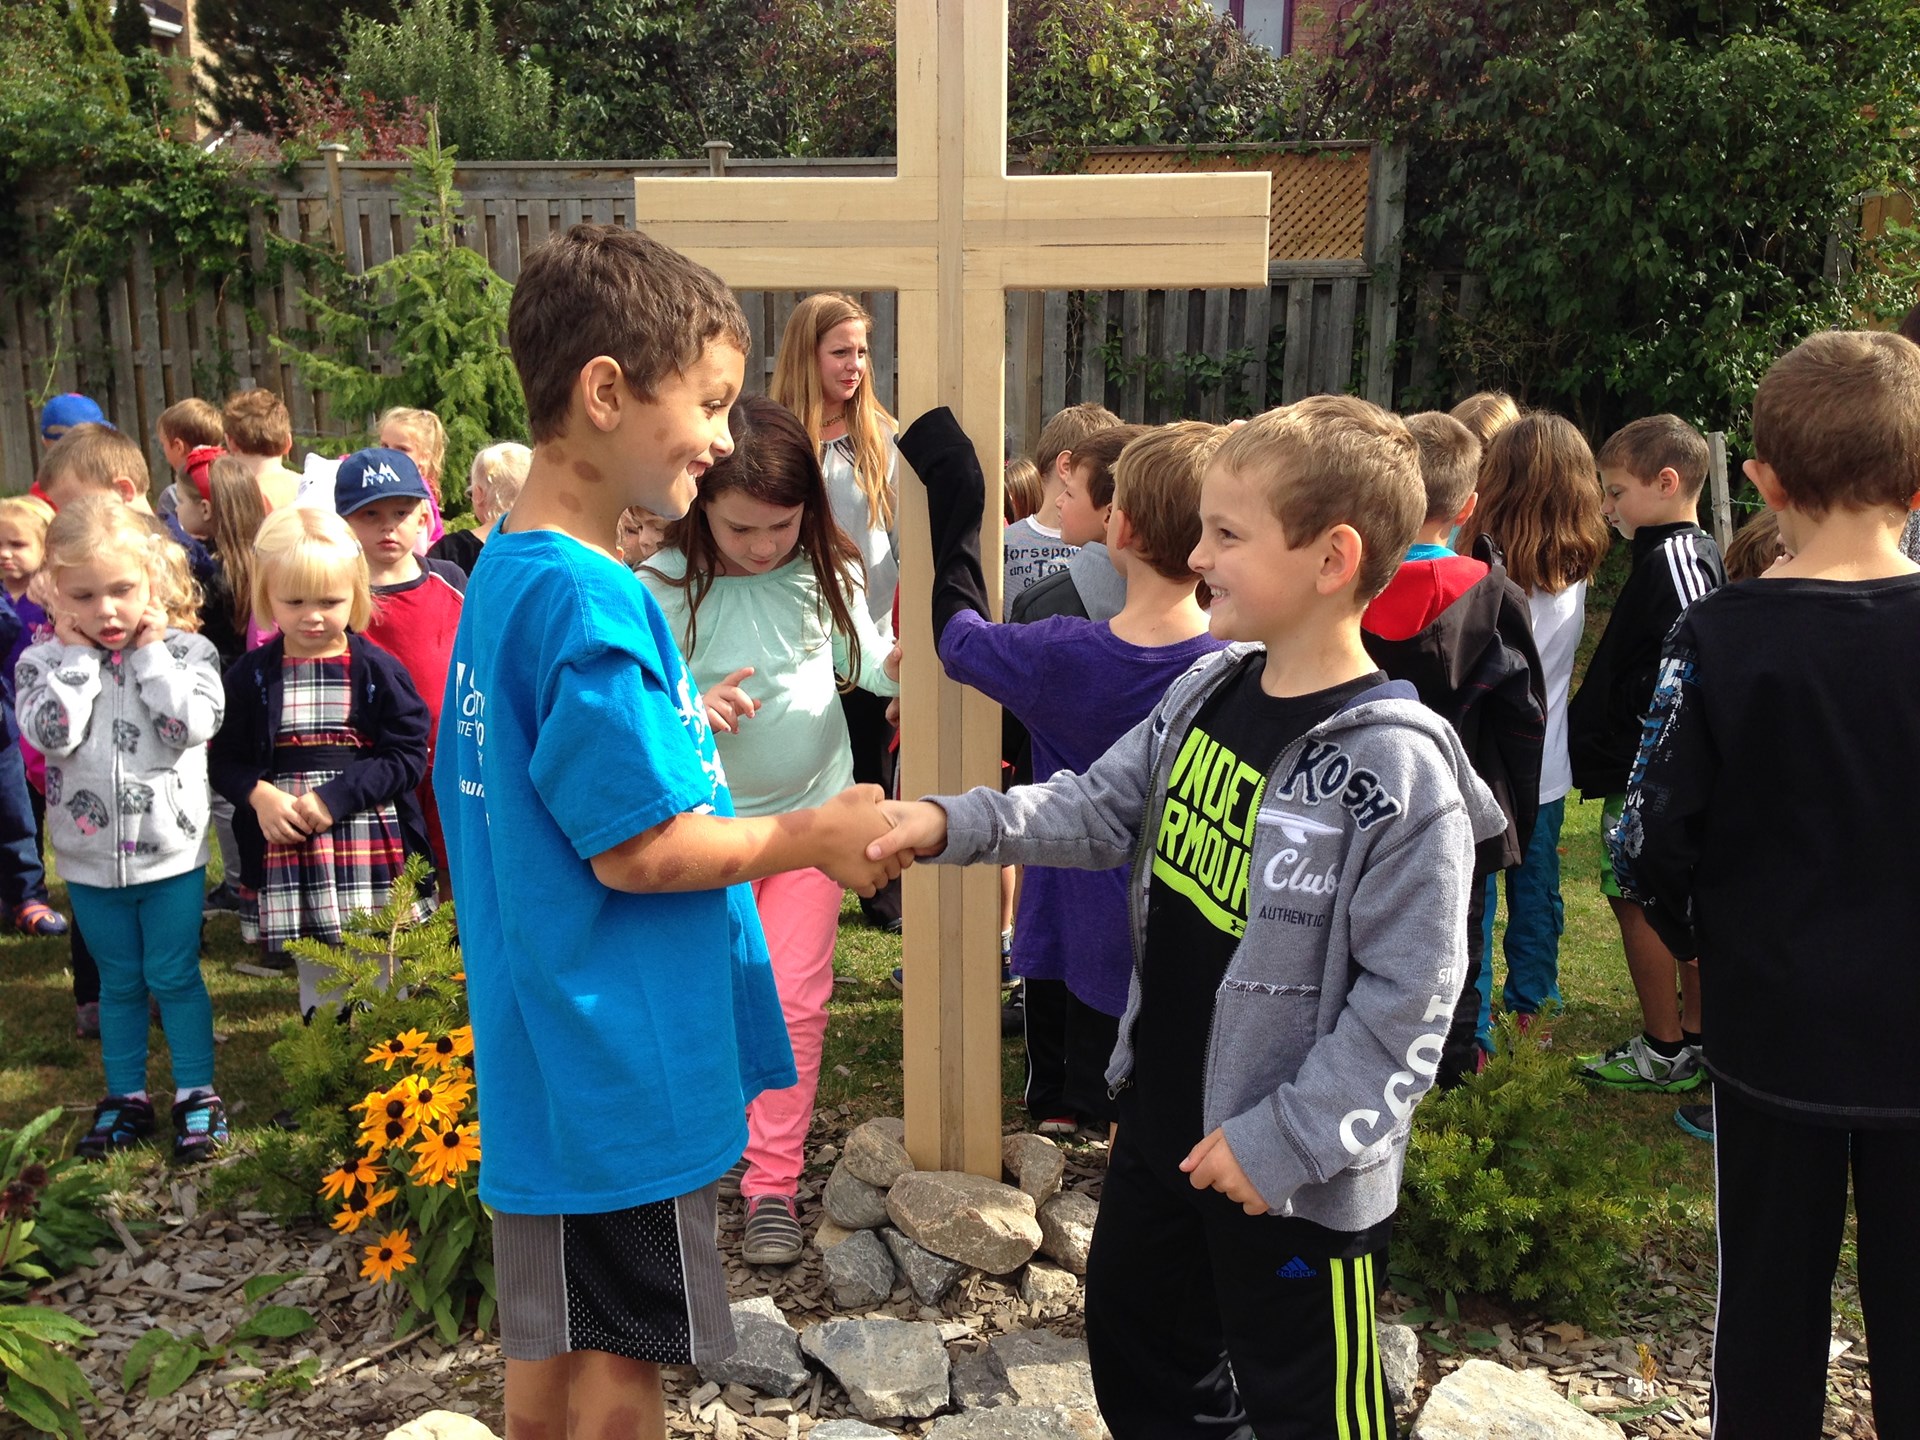 Students shaking hands in front of cross outside.